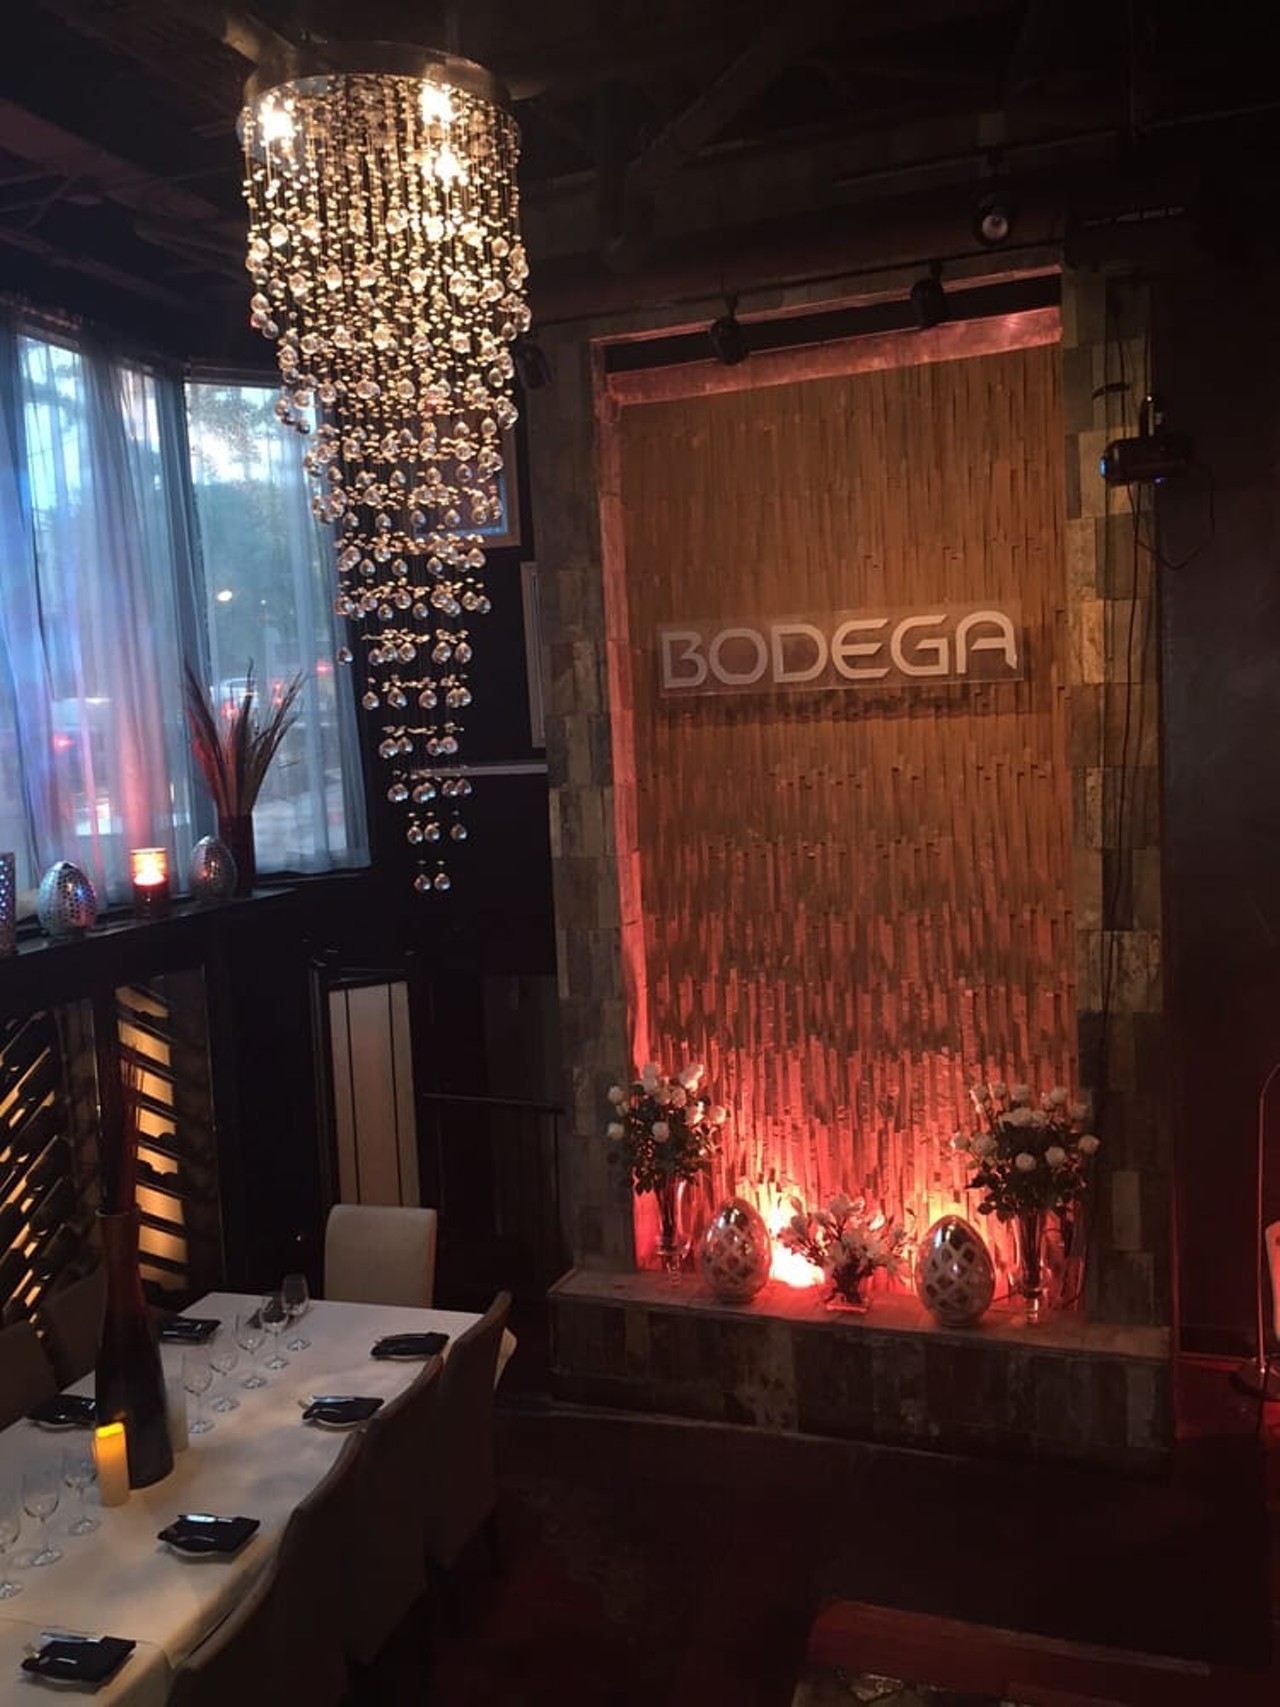  Bodega
1854 Coventry Rd., Cleveland Heights 
Set a few steps below street level (in the former Utrecht Art Supplies space), Bodega greets guests with a sleek waterfall, handsome wood floors and shimmering linens, and offers top-flight beers and a staggering amount of martinis and wines. The kitchen turns out cold tapas like stuffed grape leaves, scallop ceviche and beef carpaccio, and hot plates like bruschetta, paella and mussels in saffron. “I love Miami,” says owner Said Ouaddaadaa. ”I thought, why not bring Miami to Cleveland?”